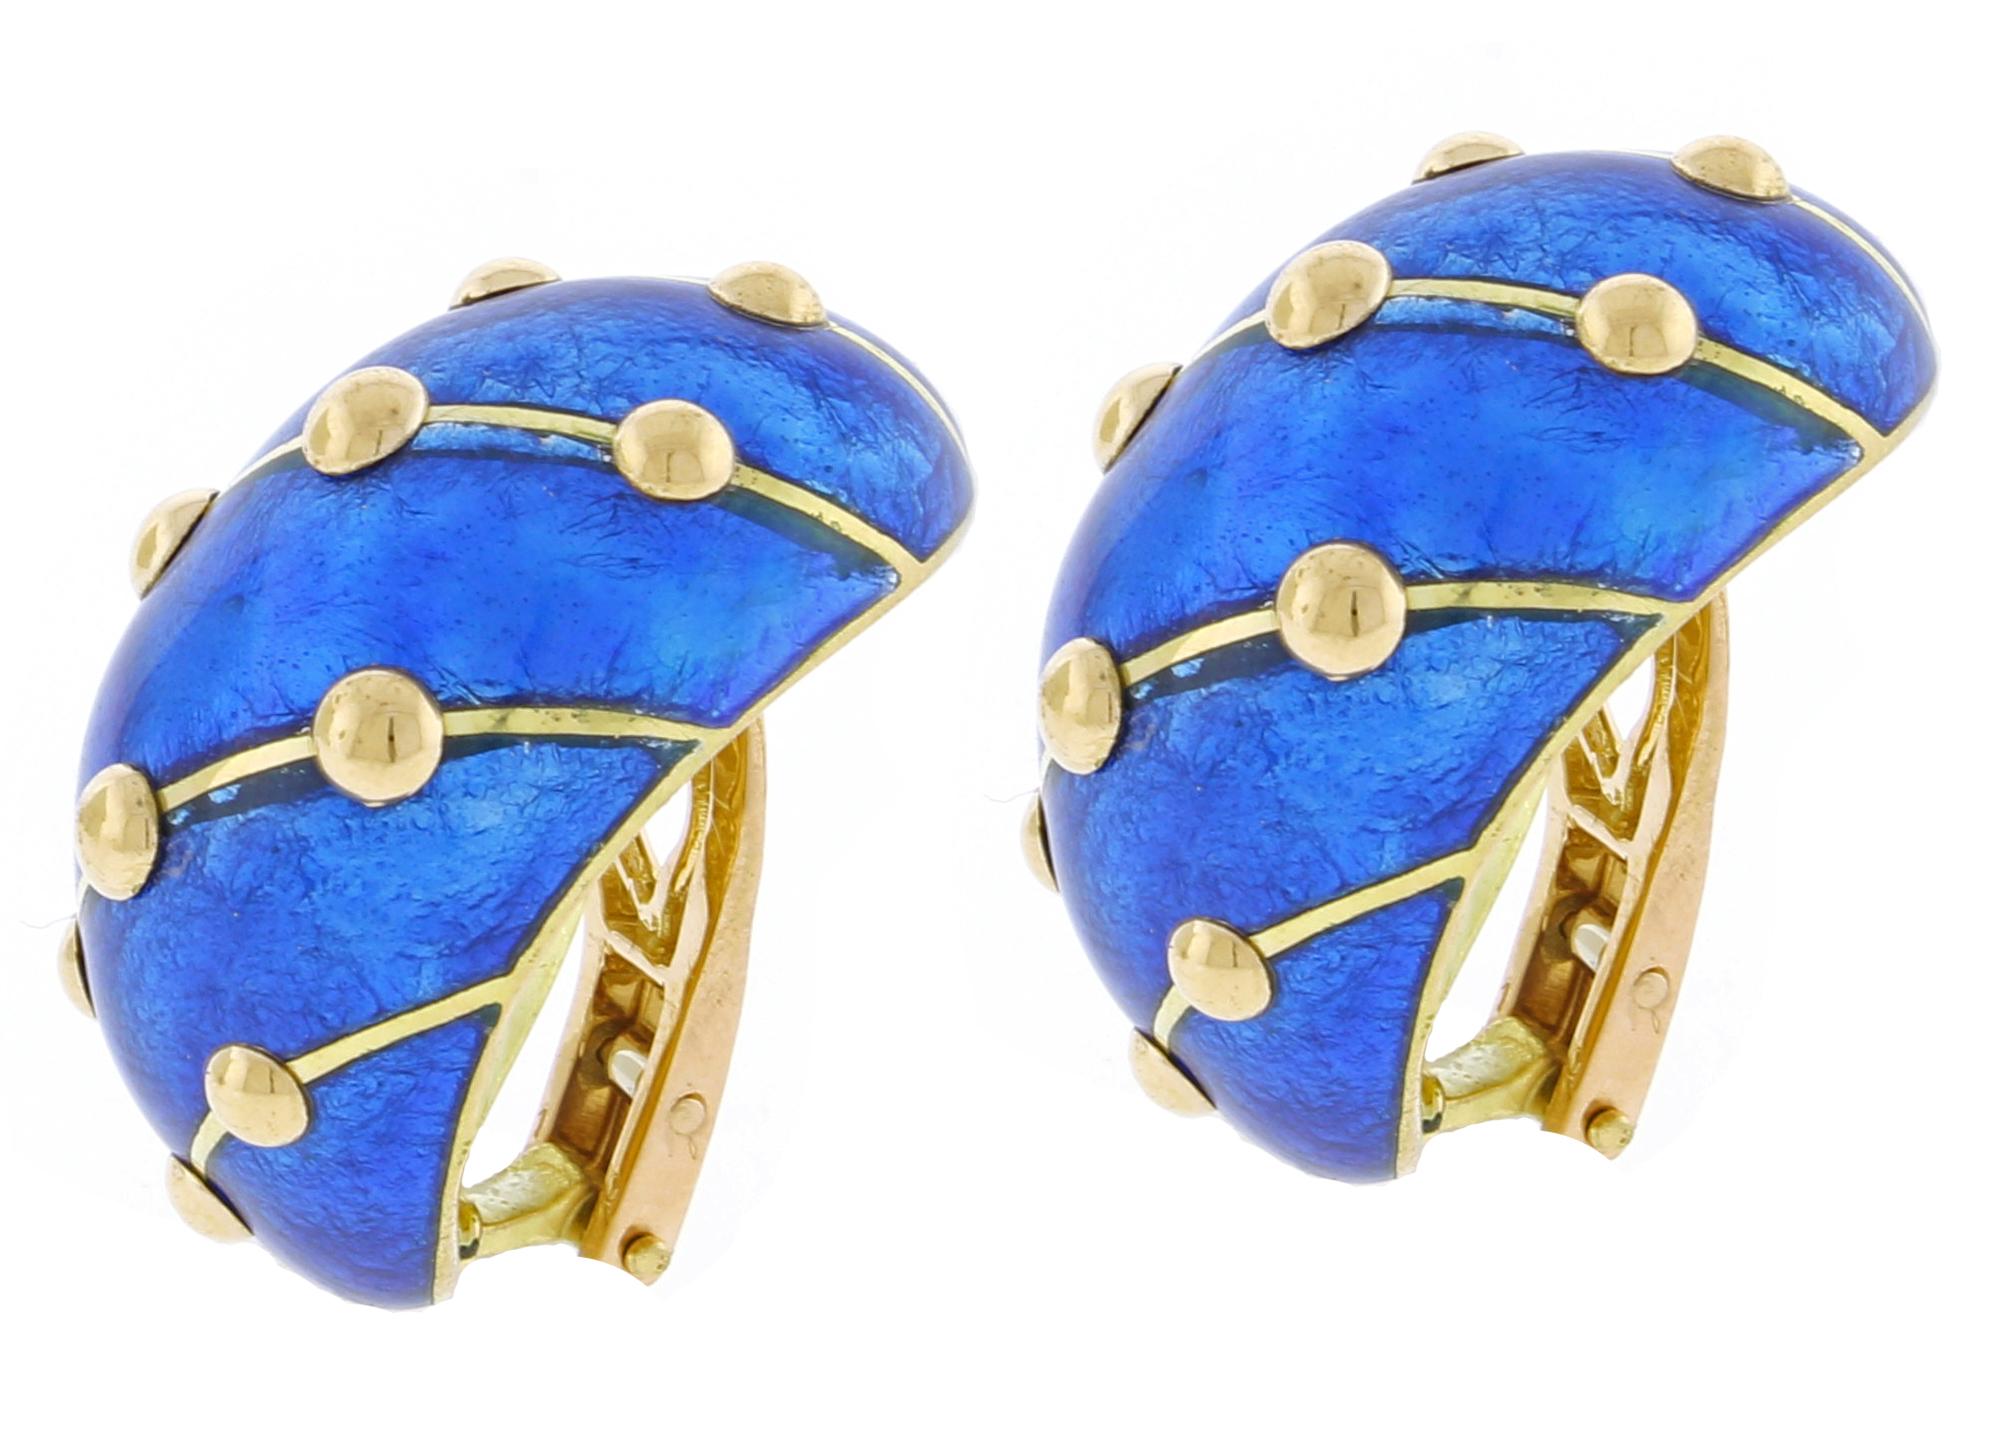 From acclaimed Tiffany & Co. designer Jean Schlumberger; a pair of  paillonné  cobalt blue enameled earrings.
♦ Designer : Schlumberger
♦ Metal: 18 karat
♦ Origin; Made in France
♦ Design Era: Contemporary
♦ Circa 1990s
♦ Packaging: Tiffany